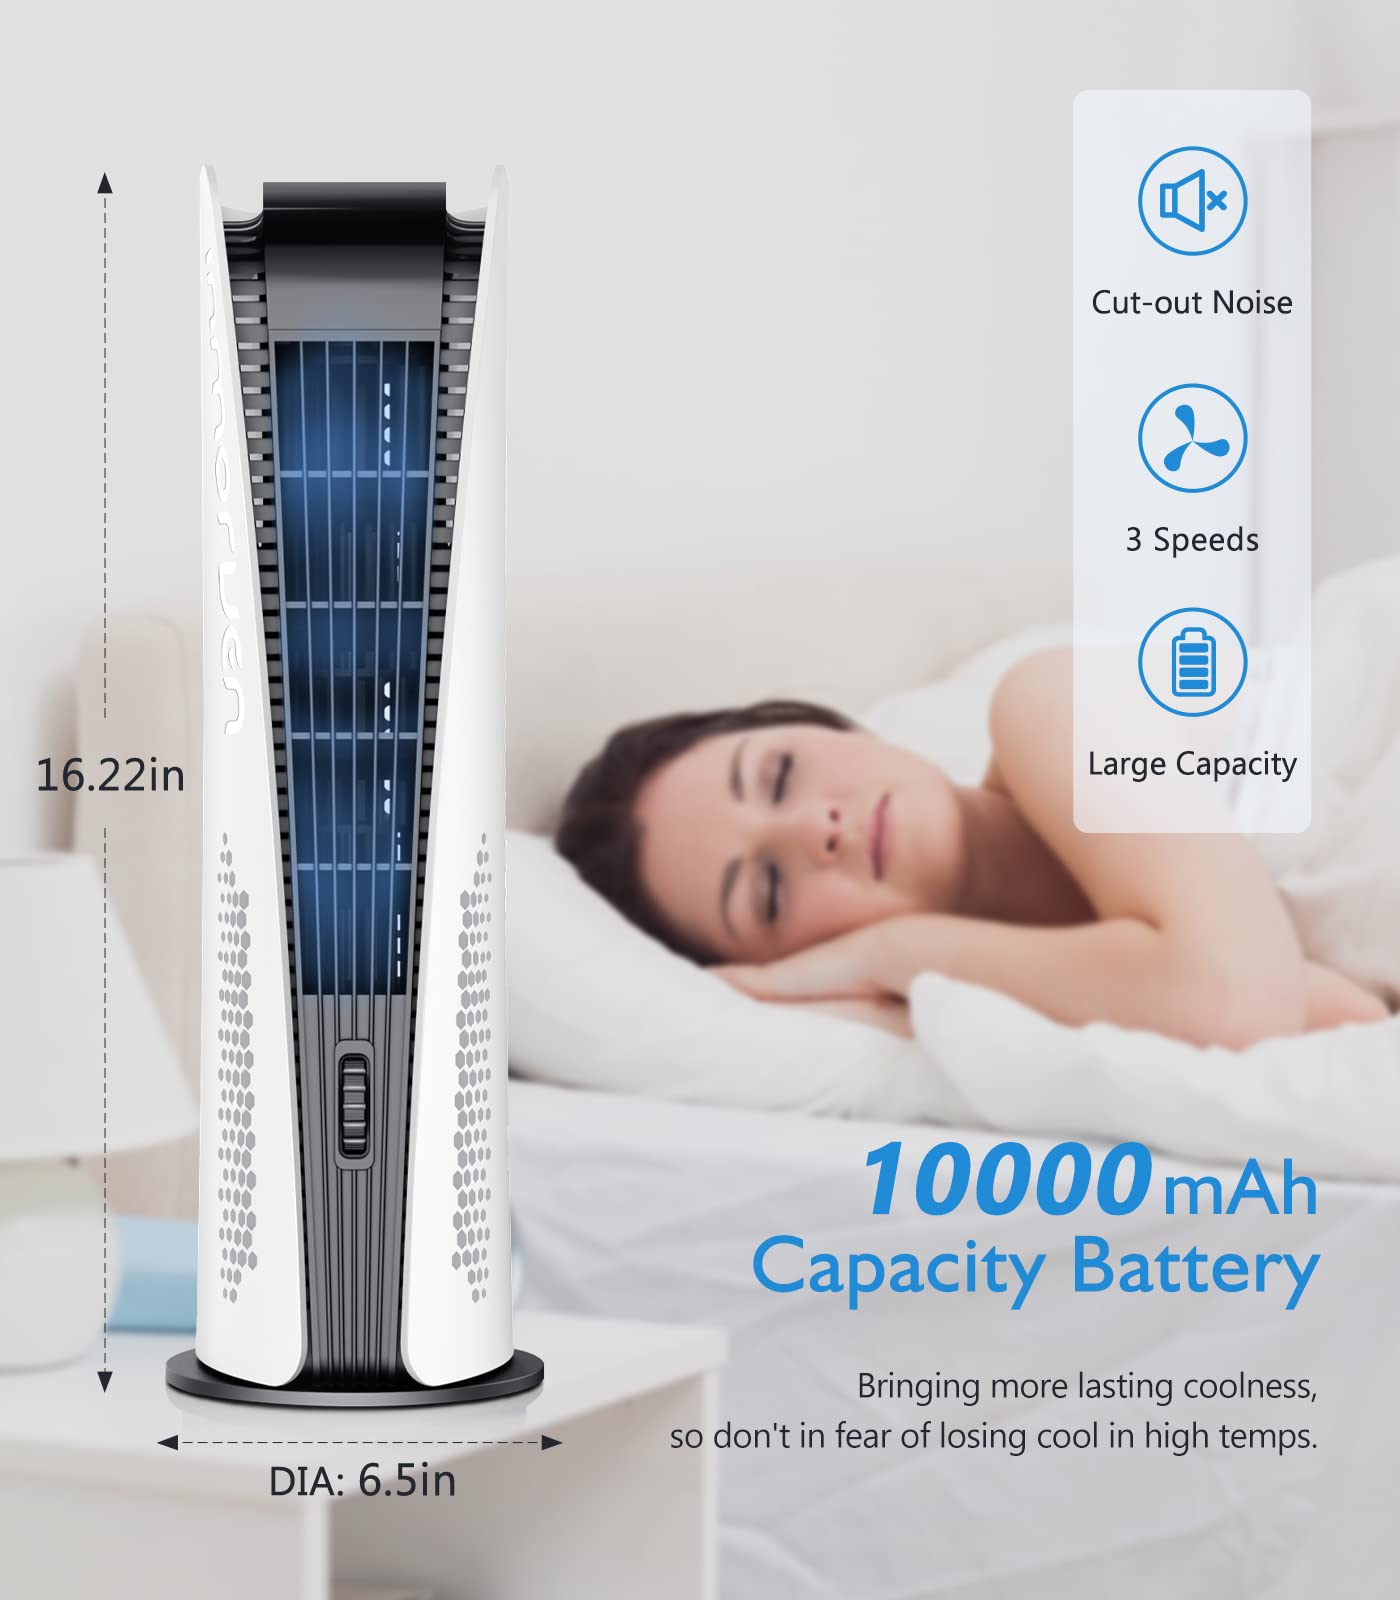 CONBOLA Portable Air Cooler Tower Fan for Bedroom, Battery Operated Bladeless Rechargeable Fan, 10000mAh Small Tower Fan, Quiet 